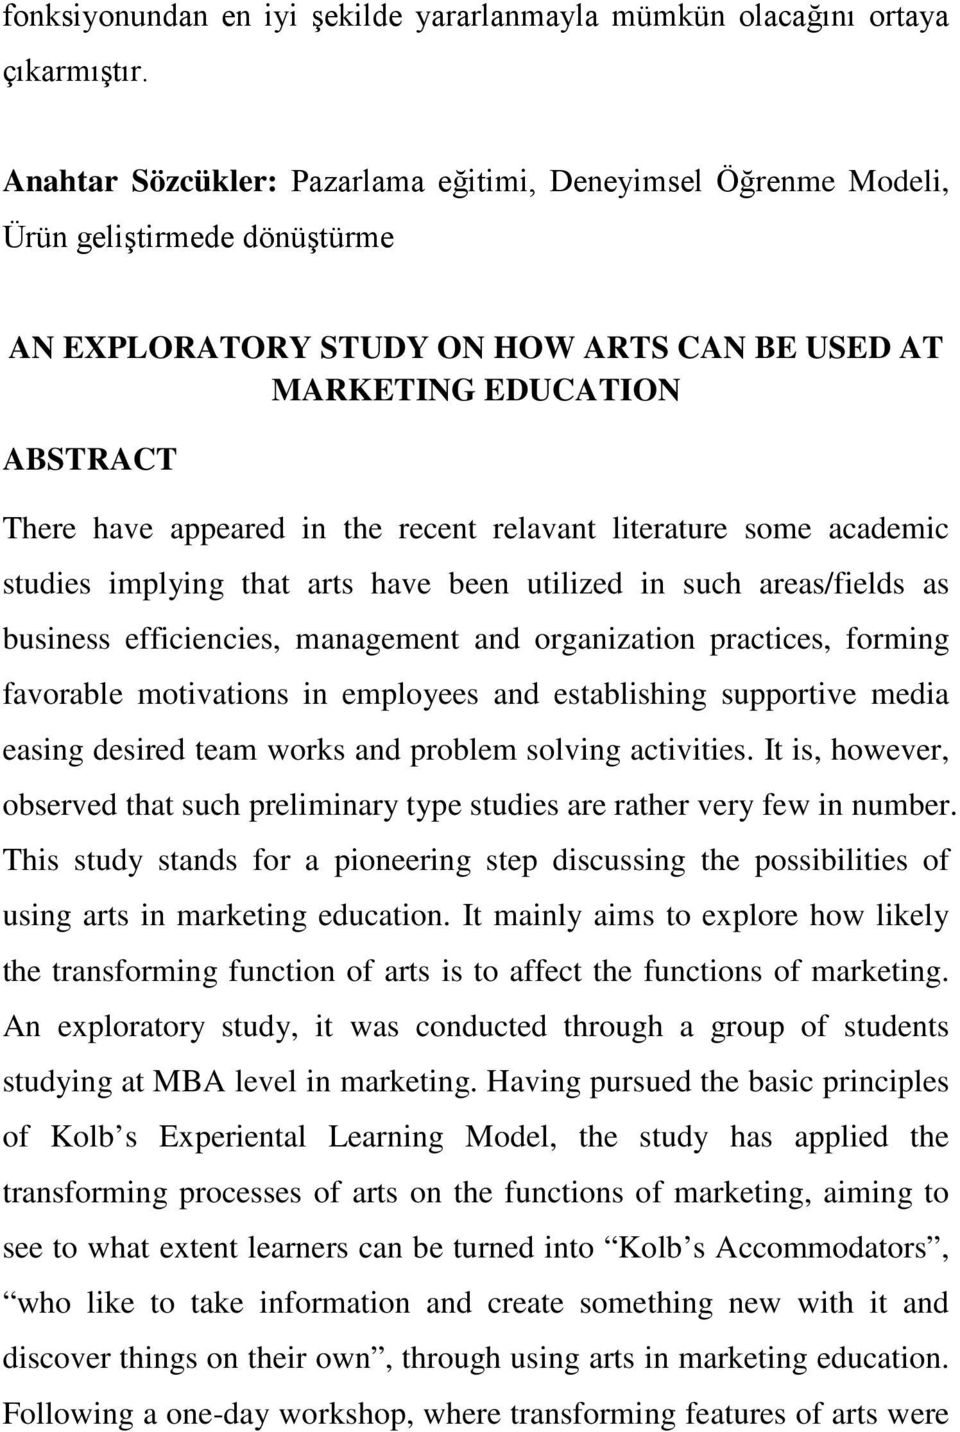 recent relavant literature some academic studies implying that arts have been utilized in such areas/fields as business efficiencies, management and organization practices, forming favorable